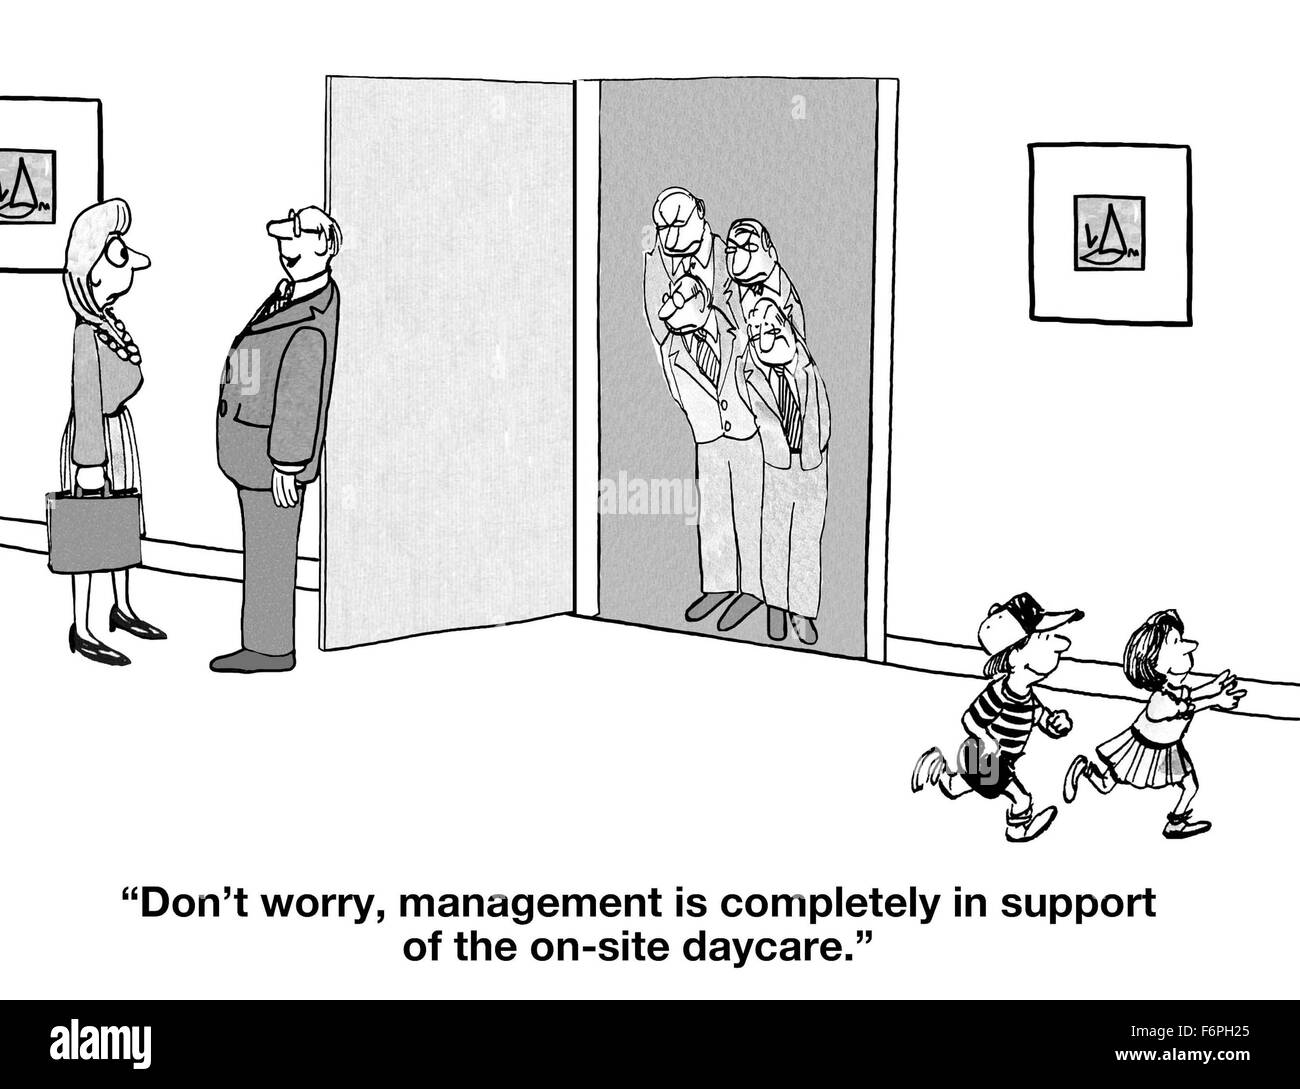 Business cartoon of misleading an employee, 'Don't worry, management is completely in support of the on-site daycare'. Stock Photo